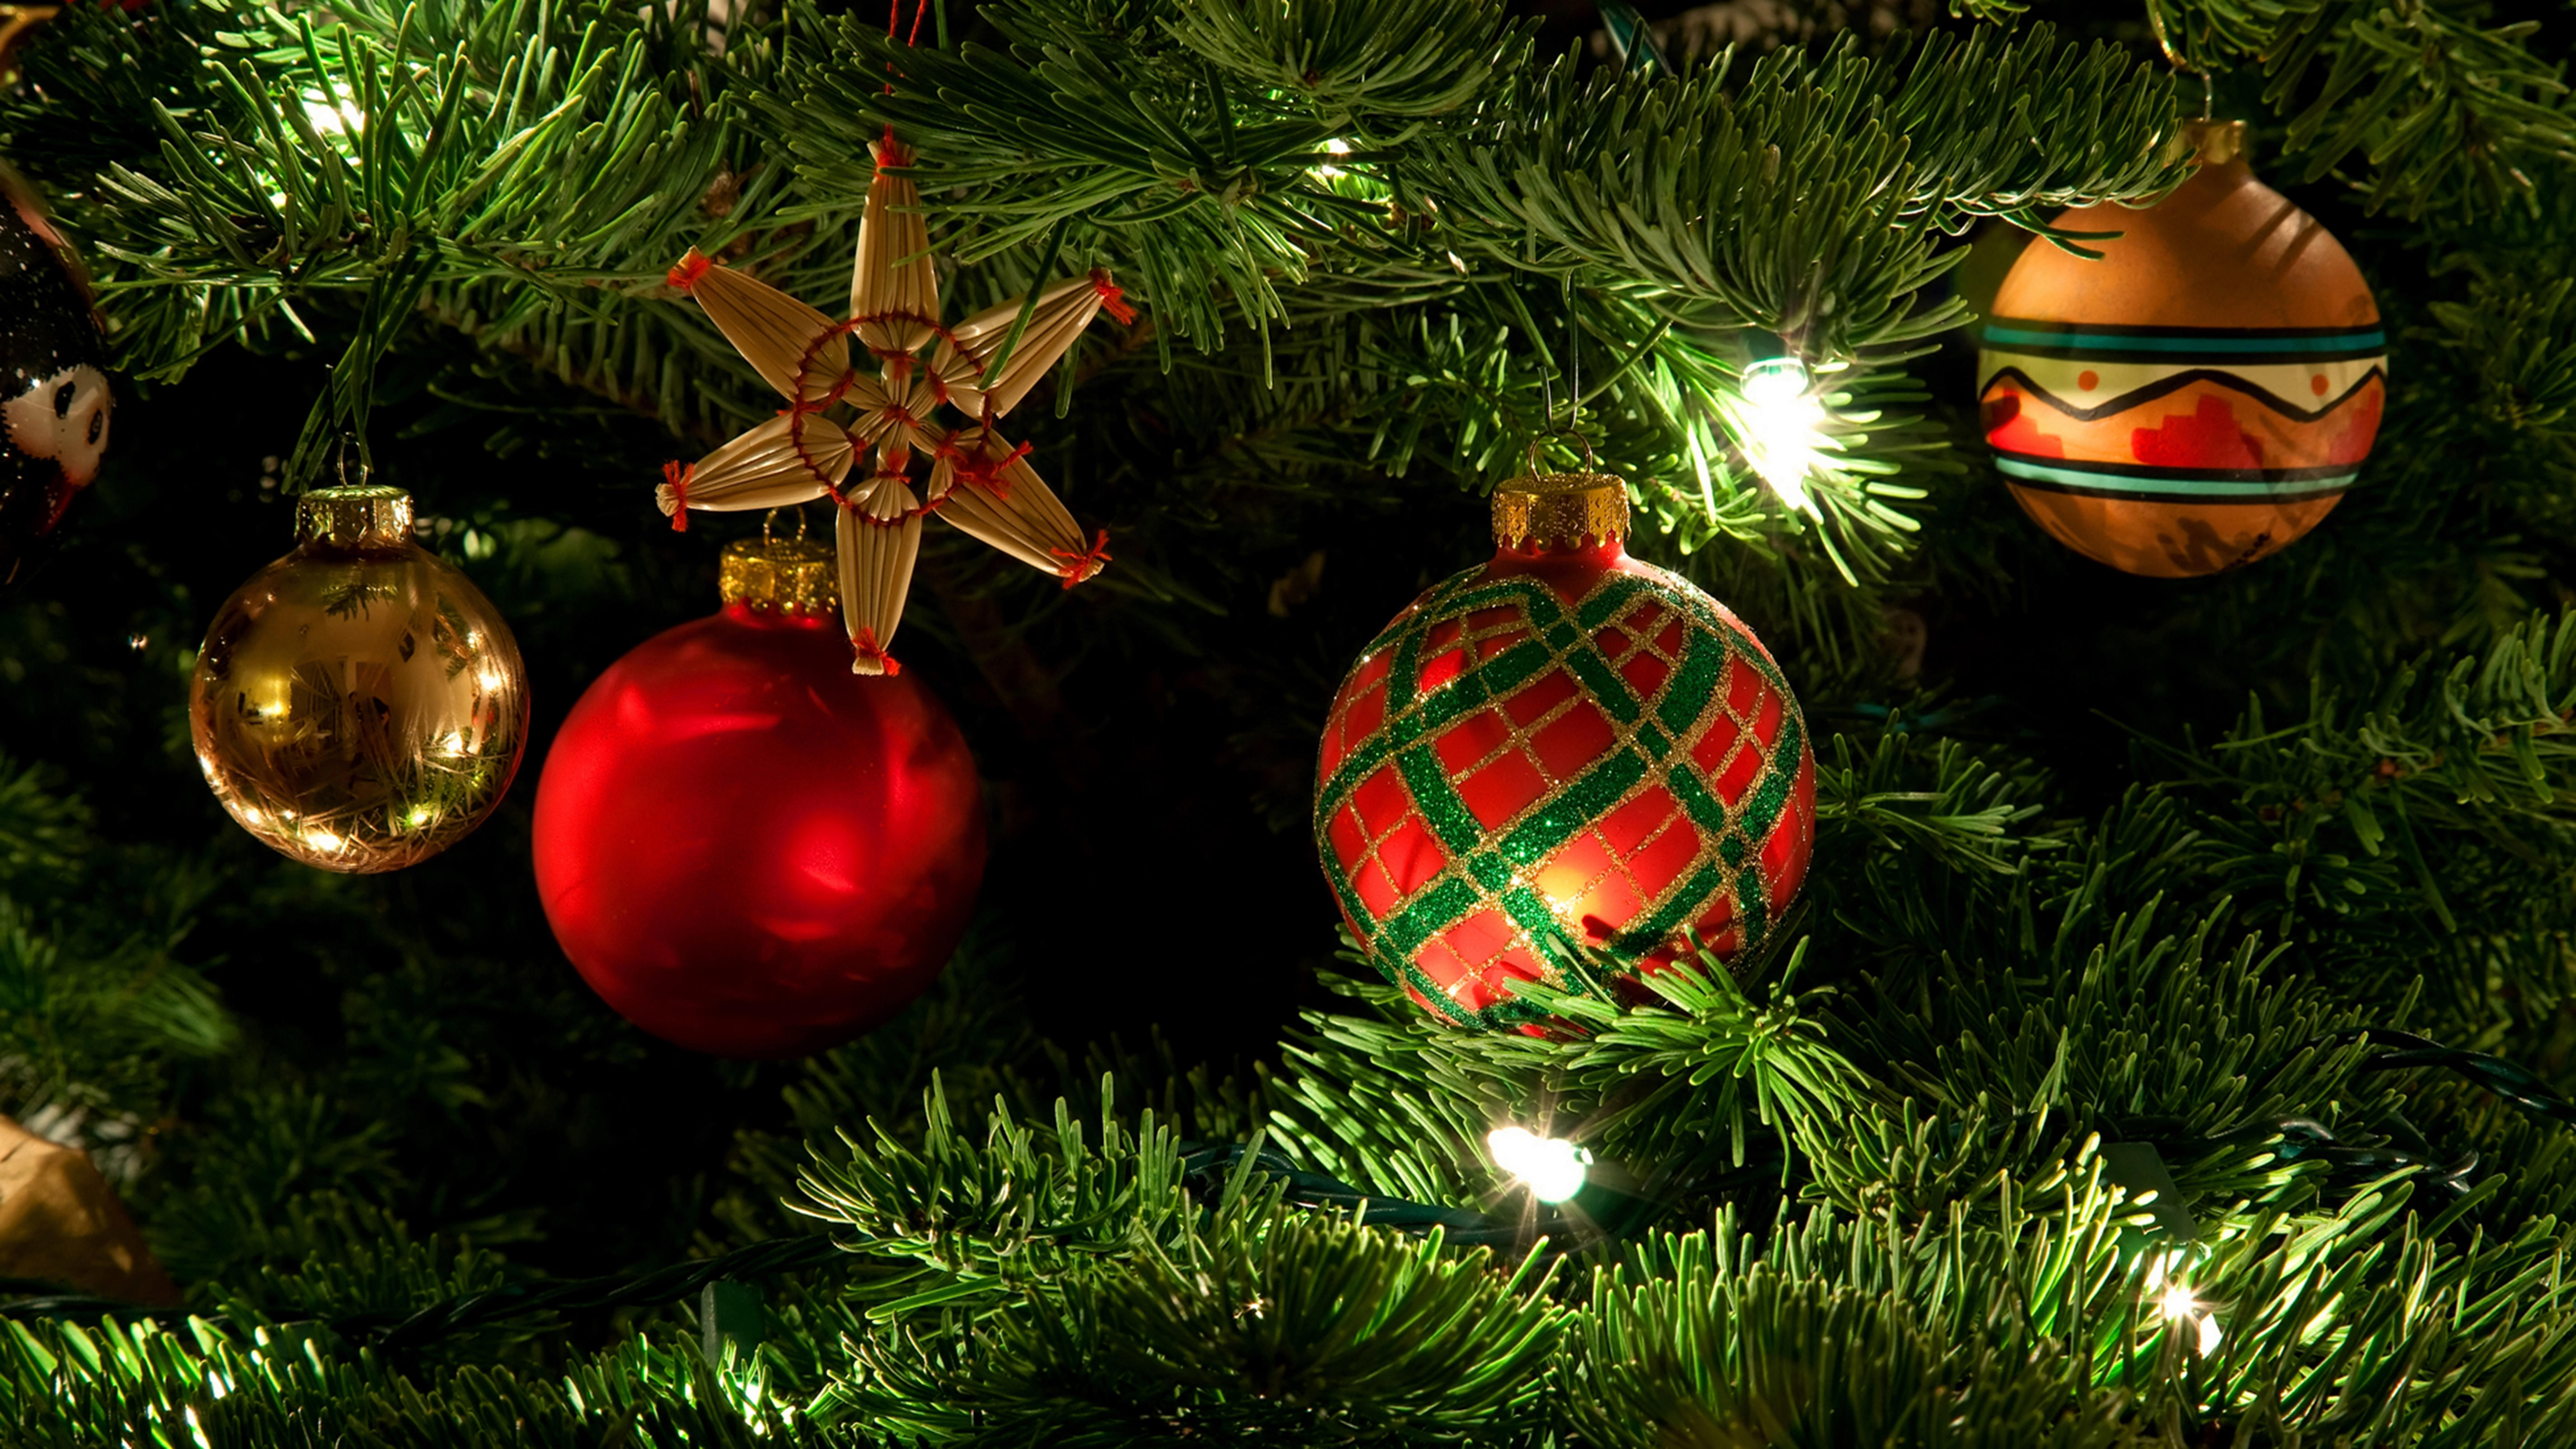 Wallpapers background garlands Christmas tree on the desktop